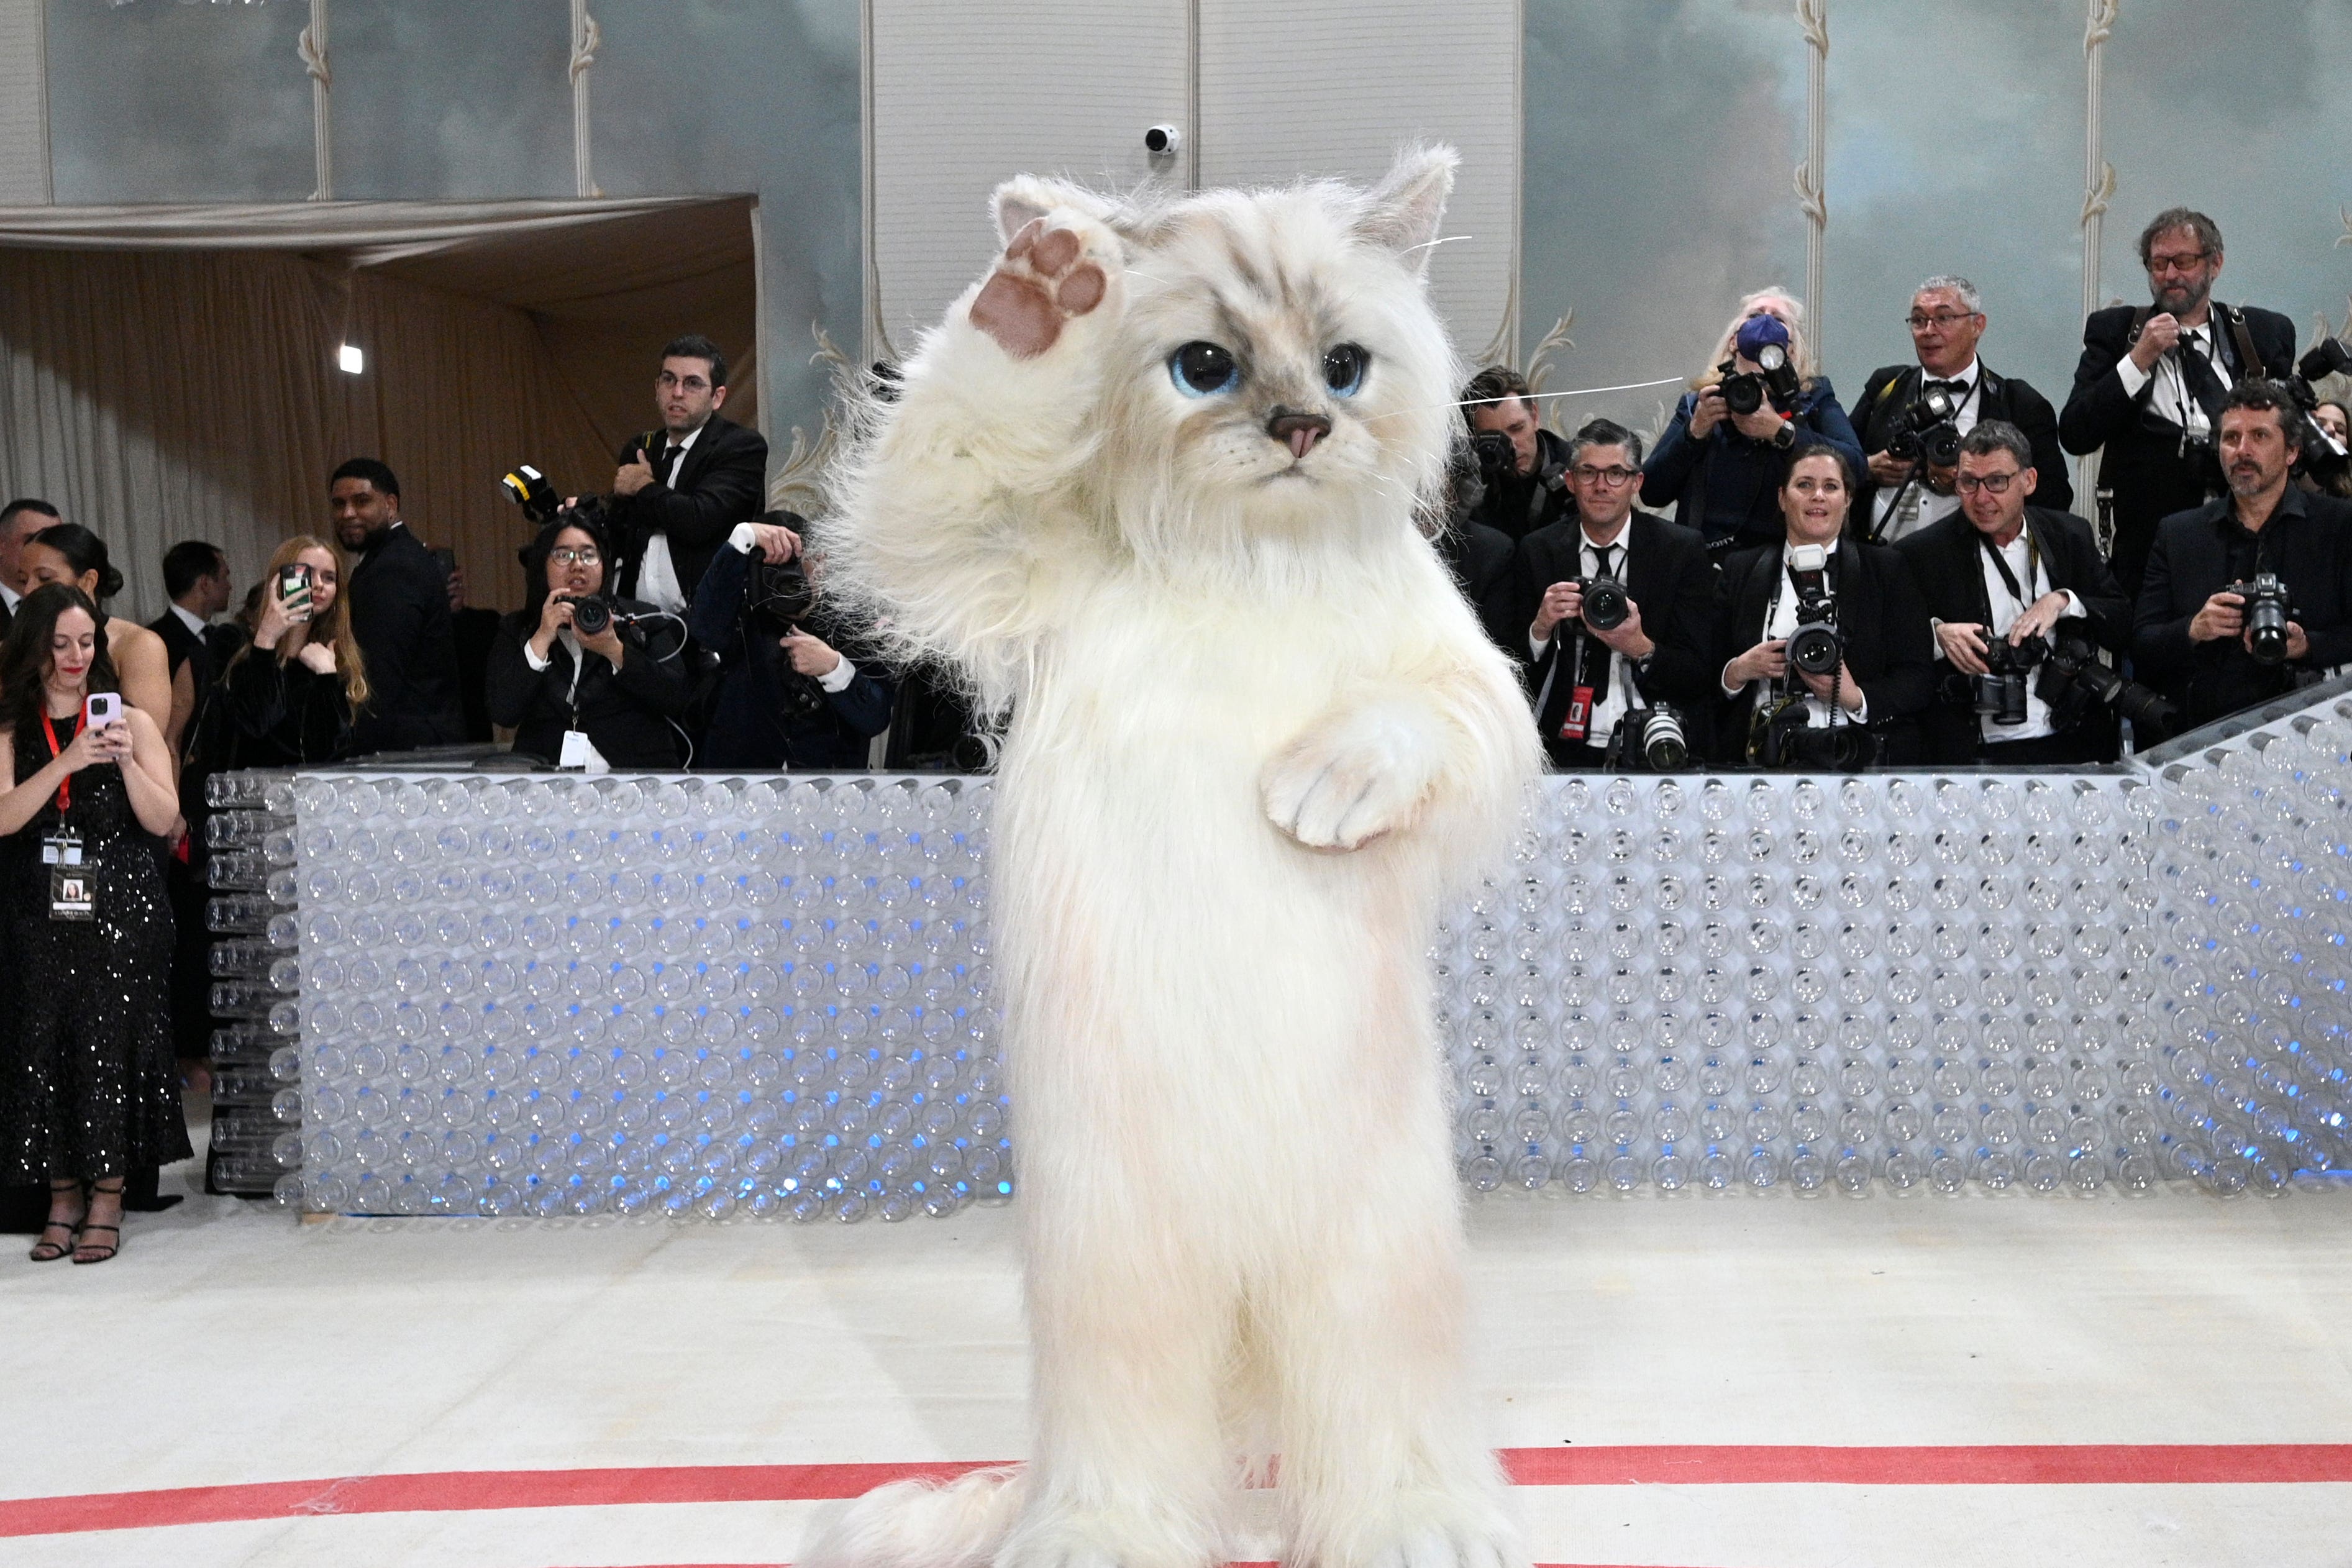 Karl Lagerfeld’s cat honoured at Met Gala with felineinspired outfits